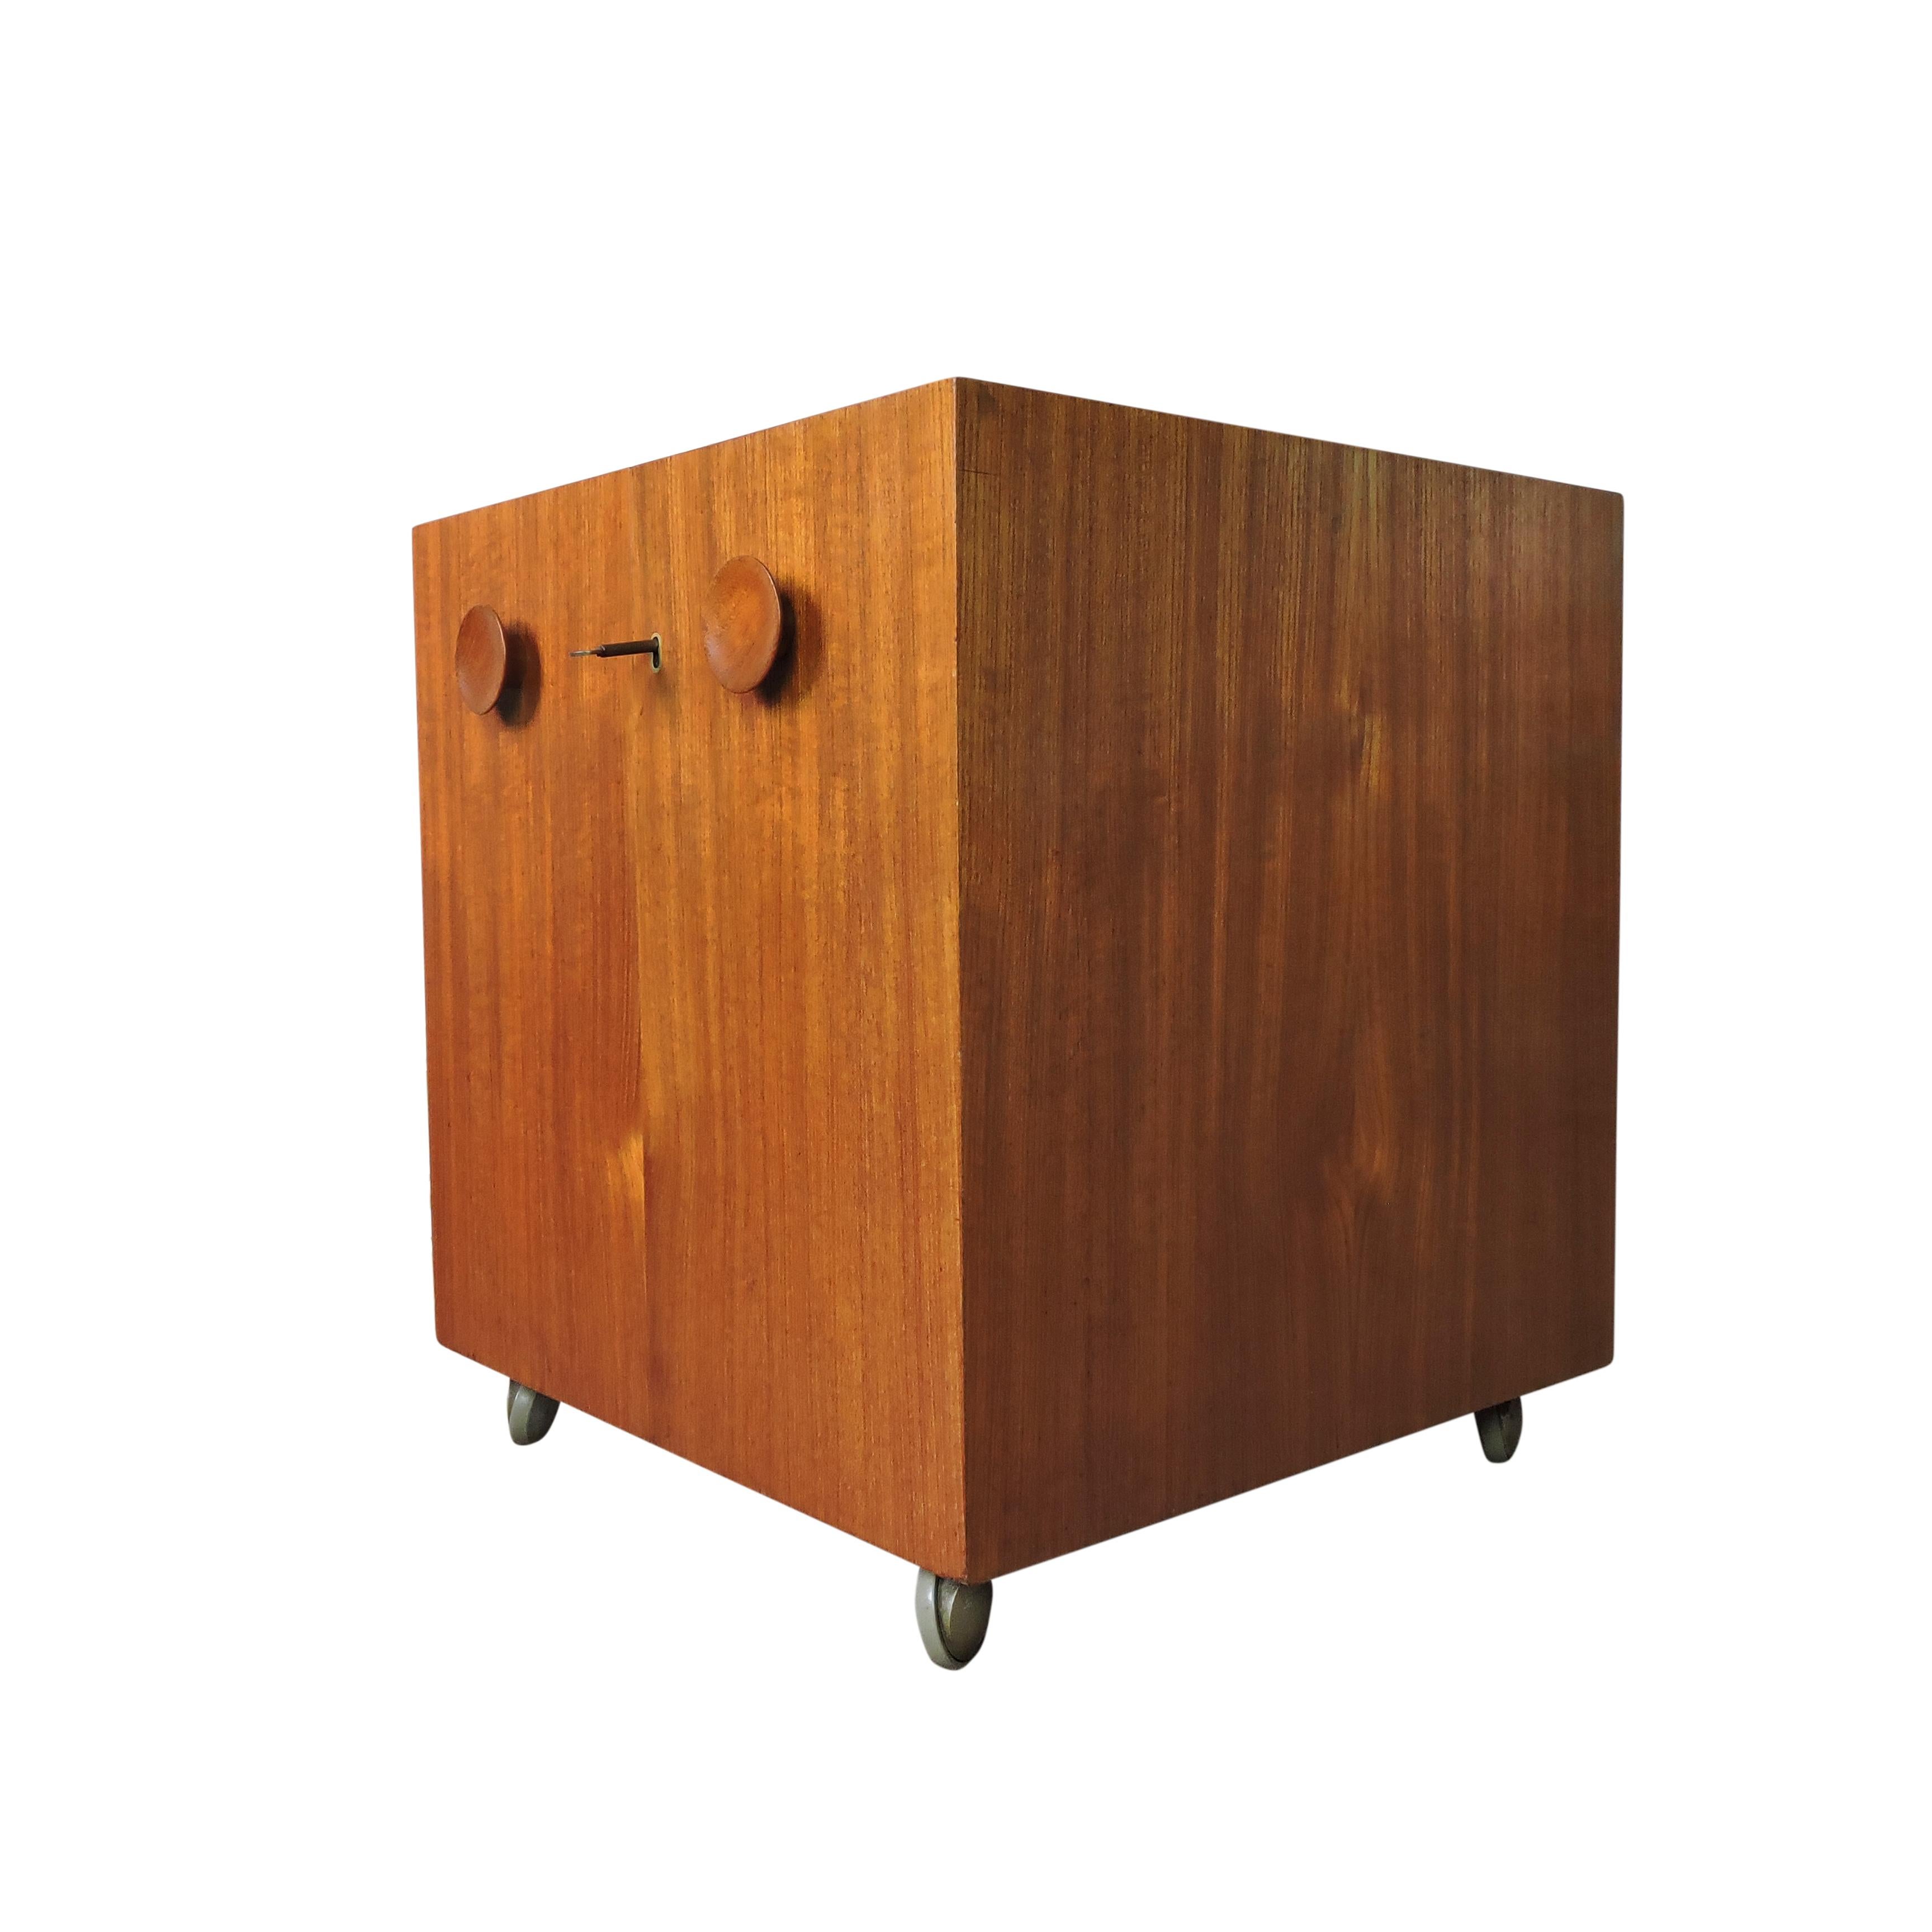 A square bar cabinet designed by Erik Buch, manufactured by Dyrlund.
It features two adjustable/removable linoleum trays and sits on metal wheels.
The cabinet is lockable.